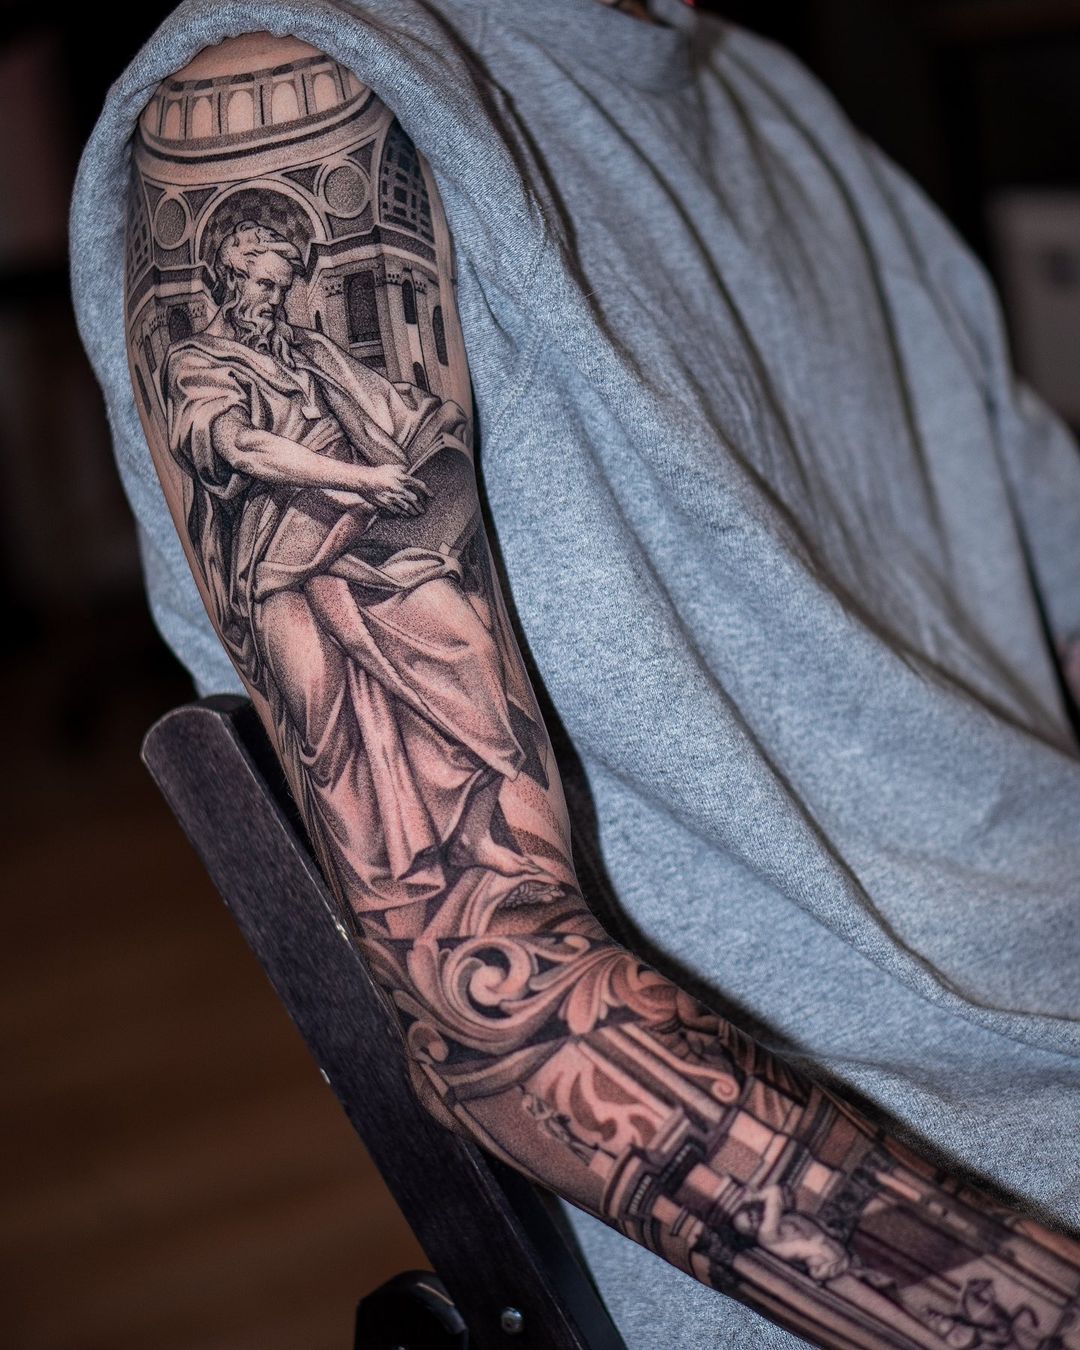 65 Unmissable St Michael Tattoo Ideas with Enthralling Meaning